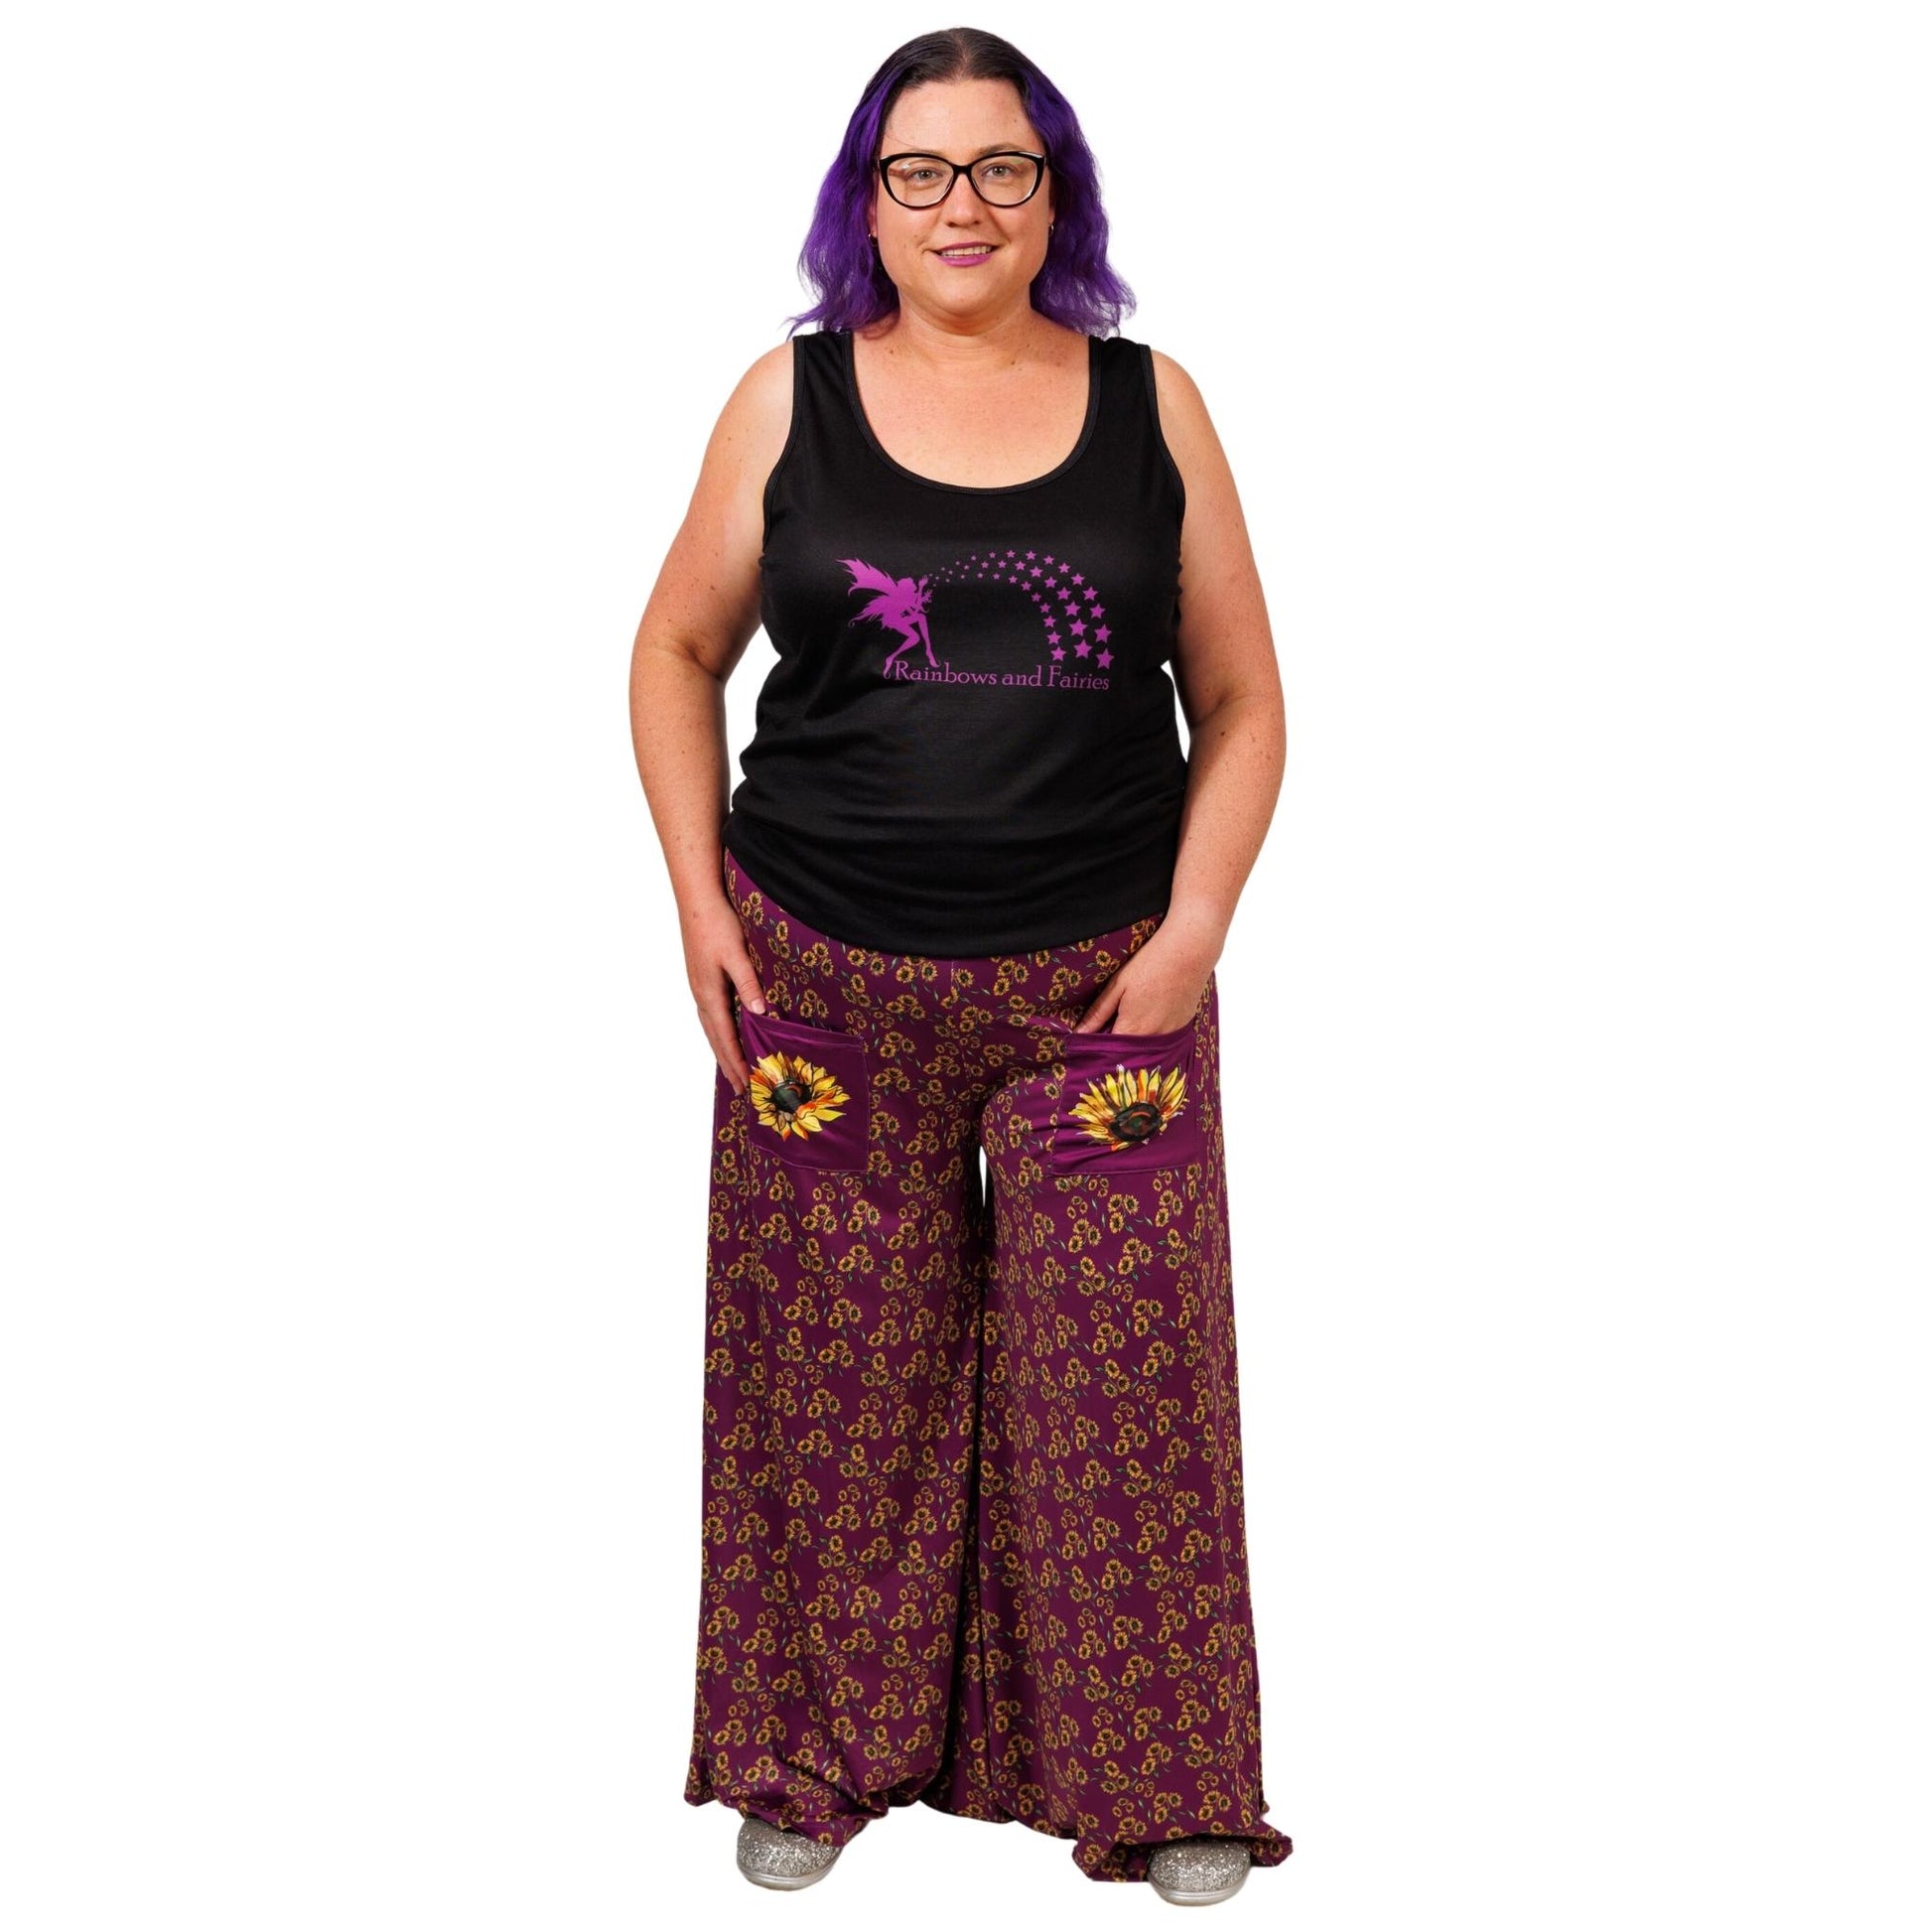 Sunflower Wide Leg Pants by RainbowsAndFairies.com.au (Sunflowers - Flowers - Floral Print - Vintage Inspired - Flares - Pants With Pockets) - SKU: CL_WIDEL_SUNFL_ORG - Pic-05